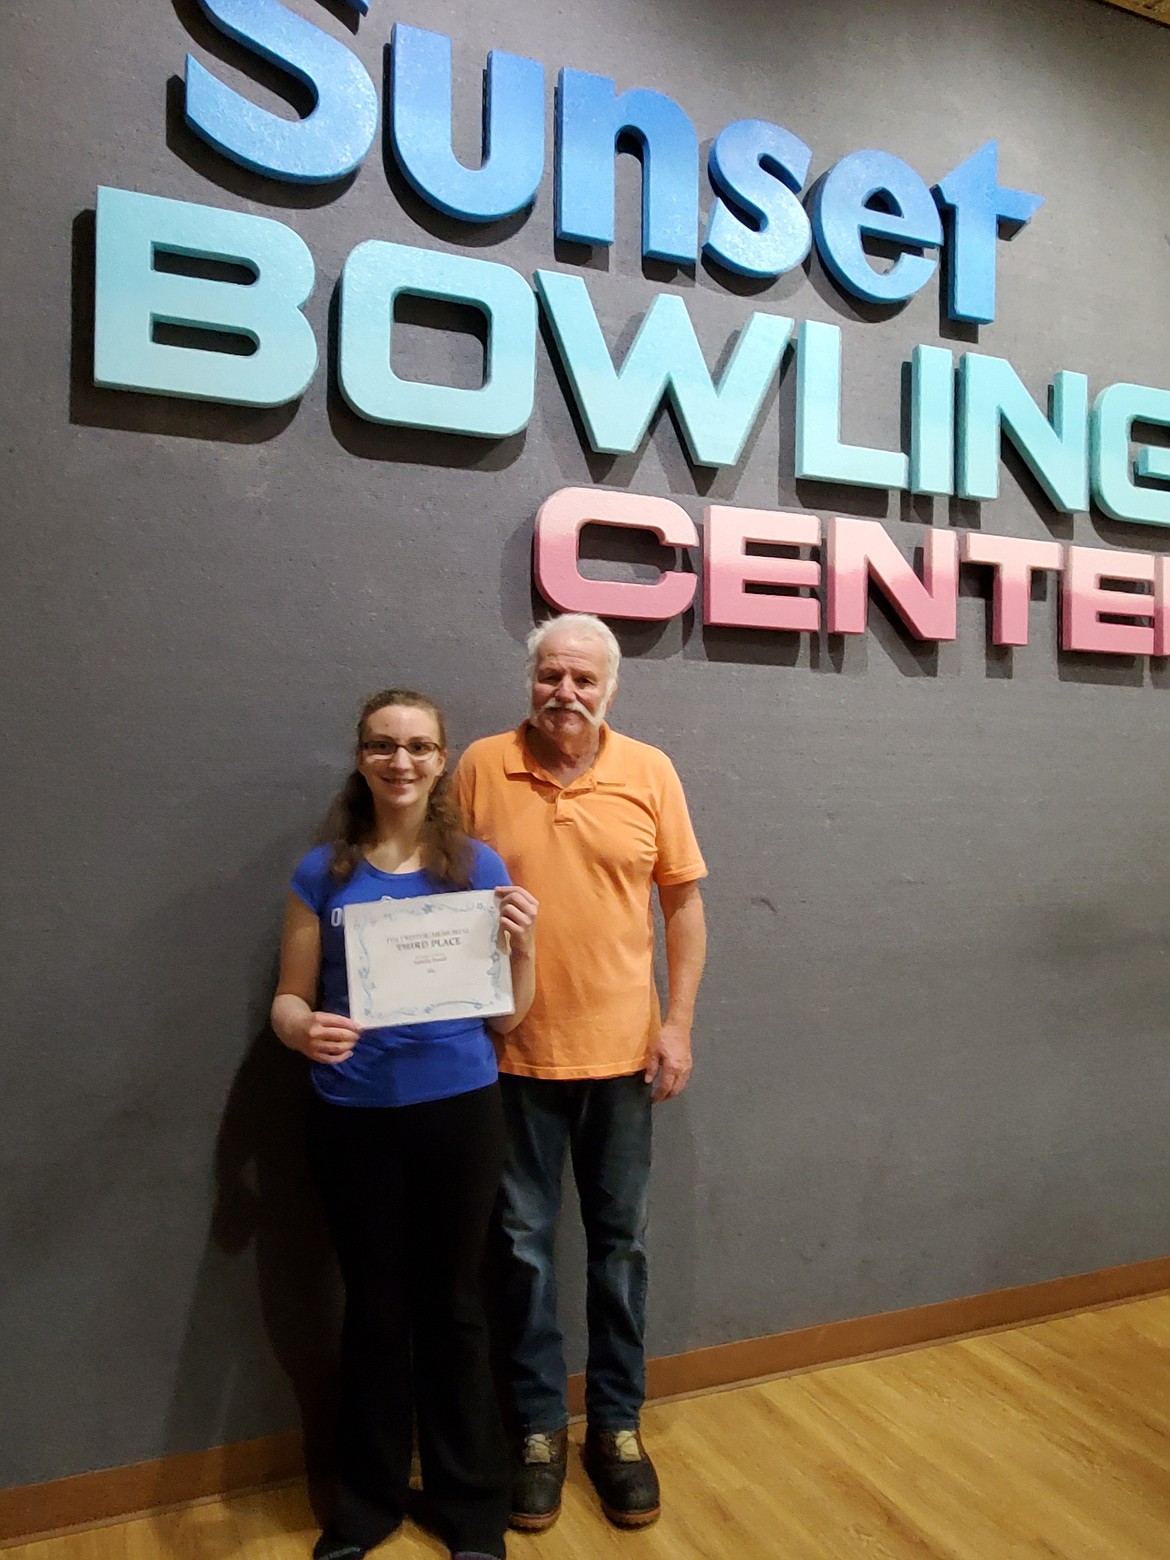 Courtesy photo
The 7th annual Tim Fristoe Youth/Adult Tournament took place Sunday at Sunset Bowling Center in Coeur d'Alene. Third place went to Isabella Powell, left, and Ralph Jerome. Powell earned a $65 scholarship.